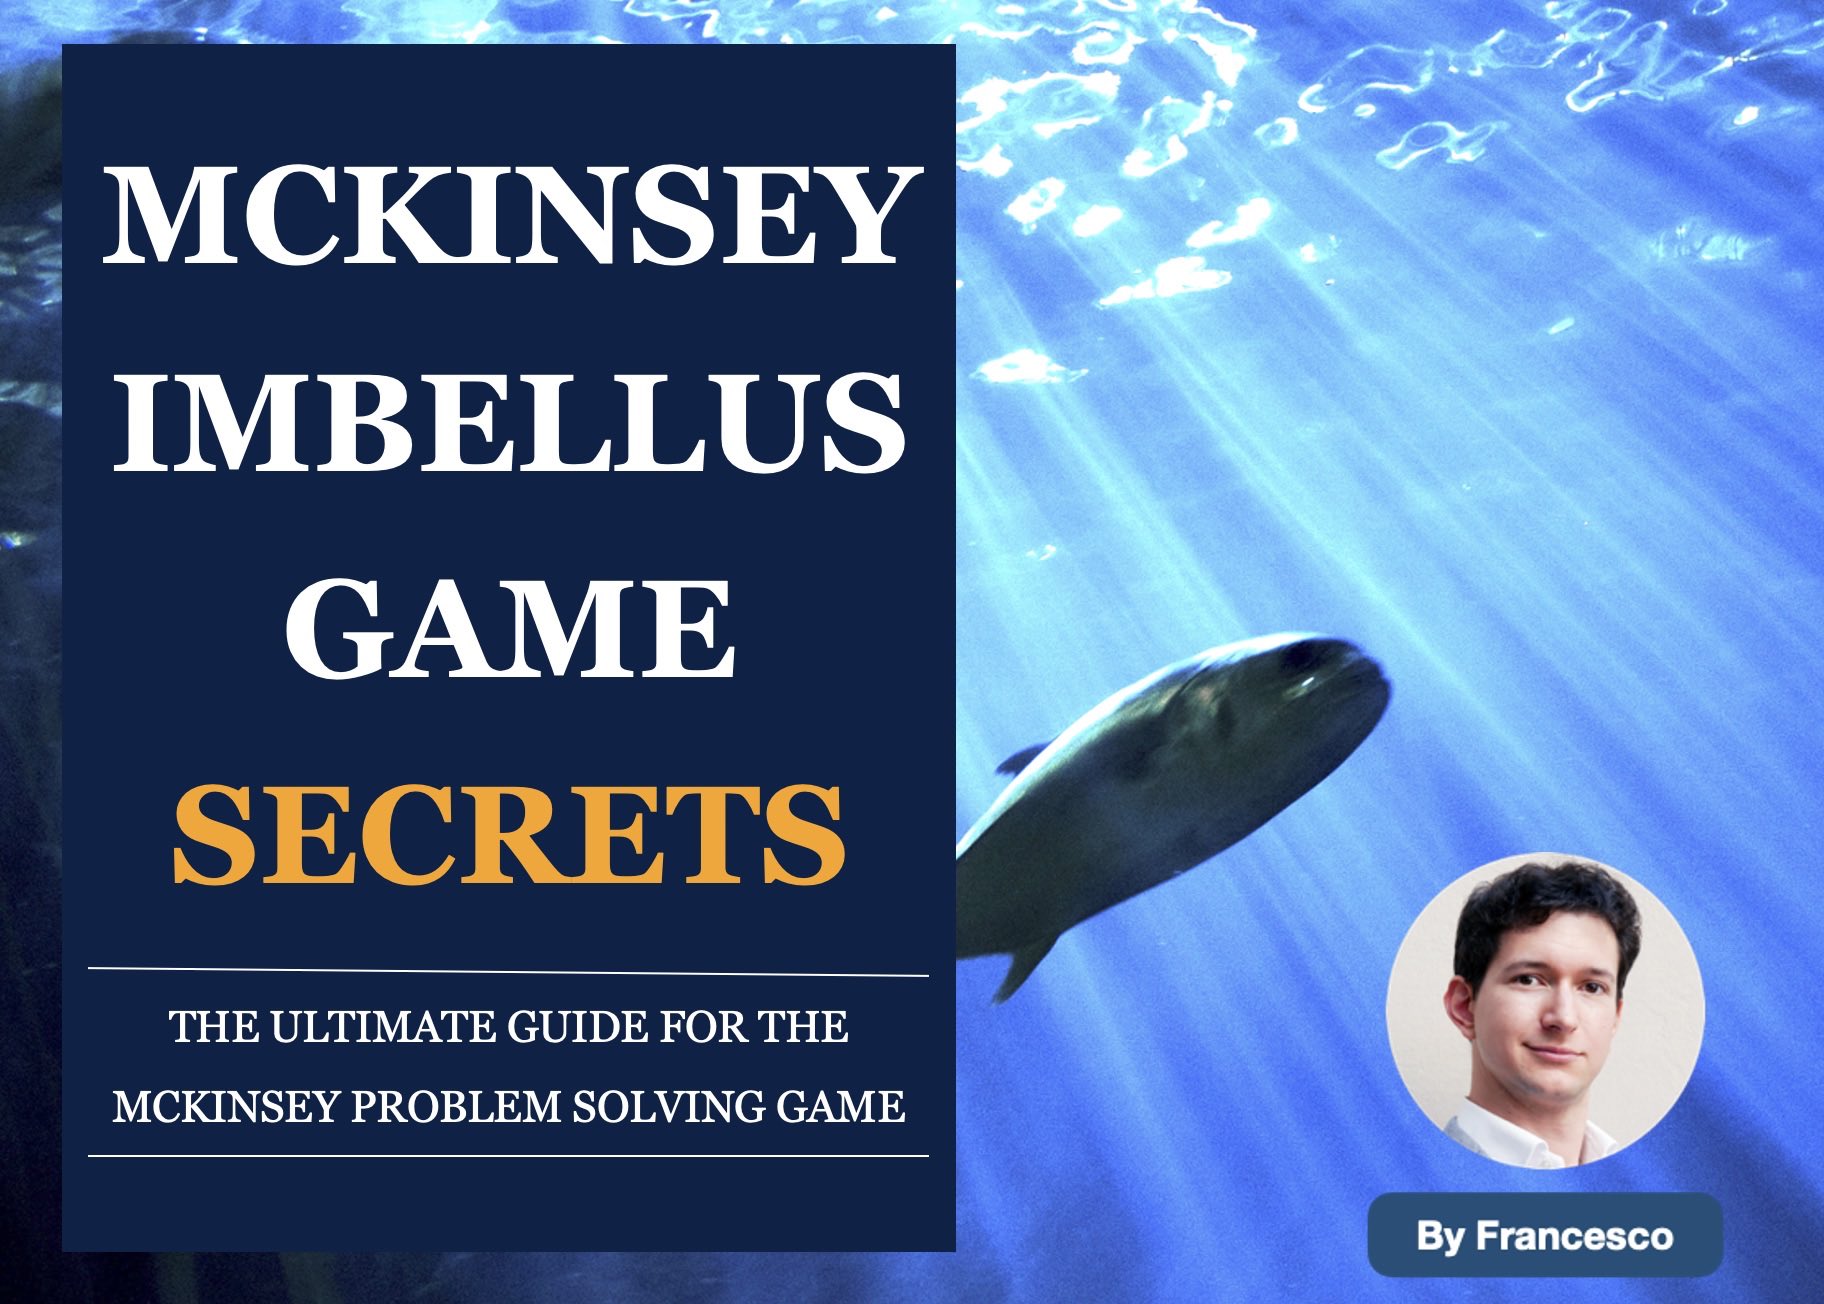 McKinsey Imbellus Guide by Francesco